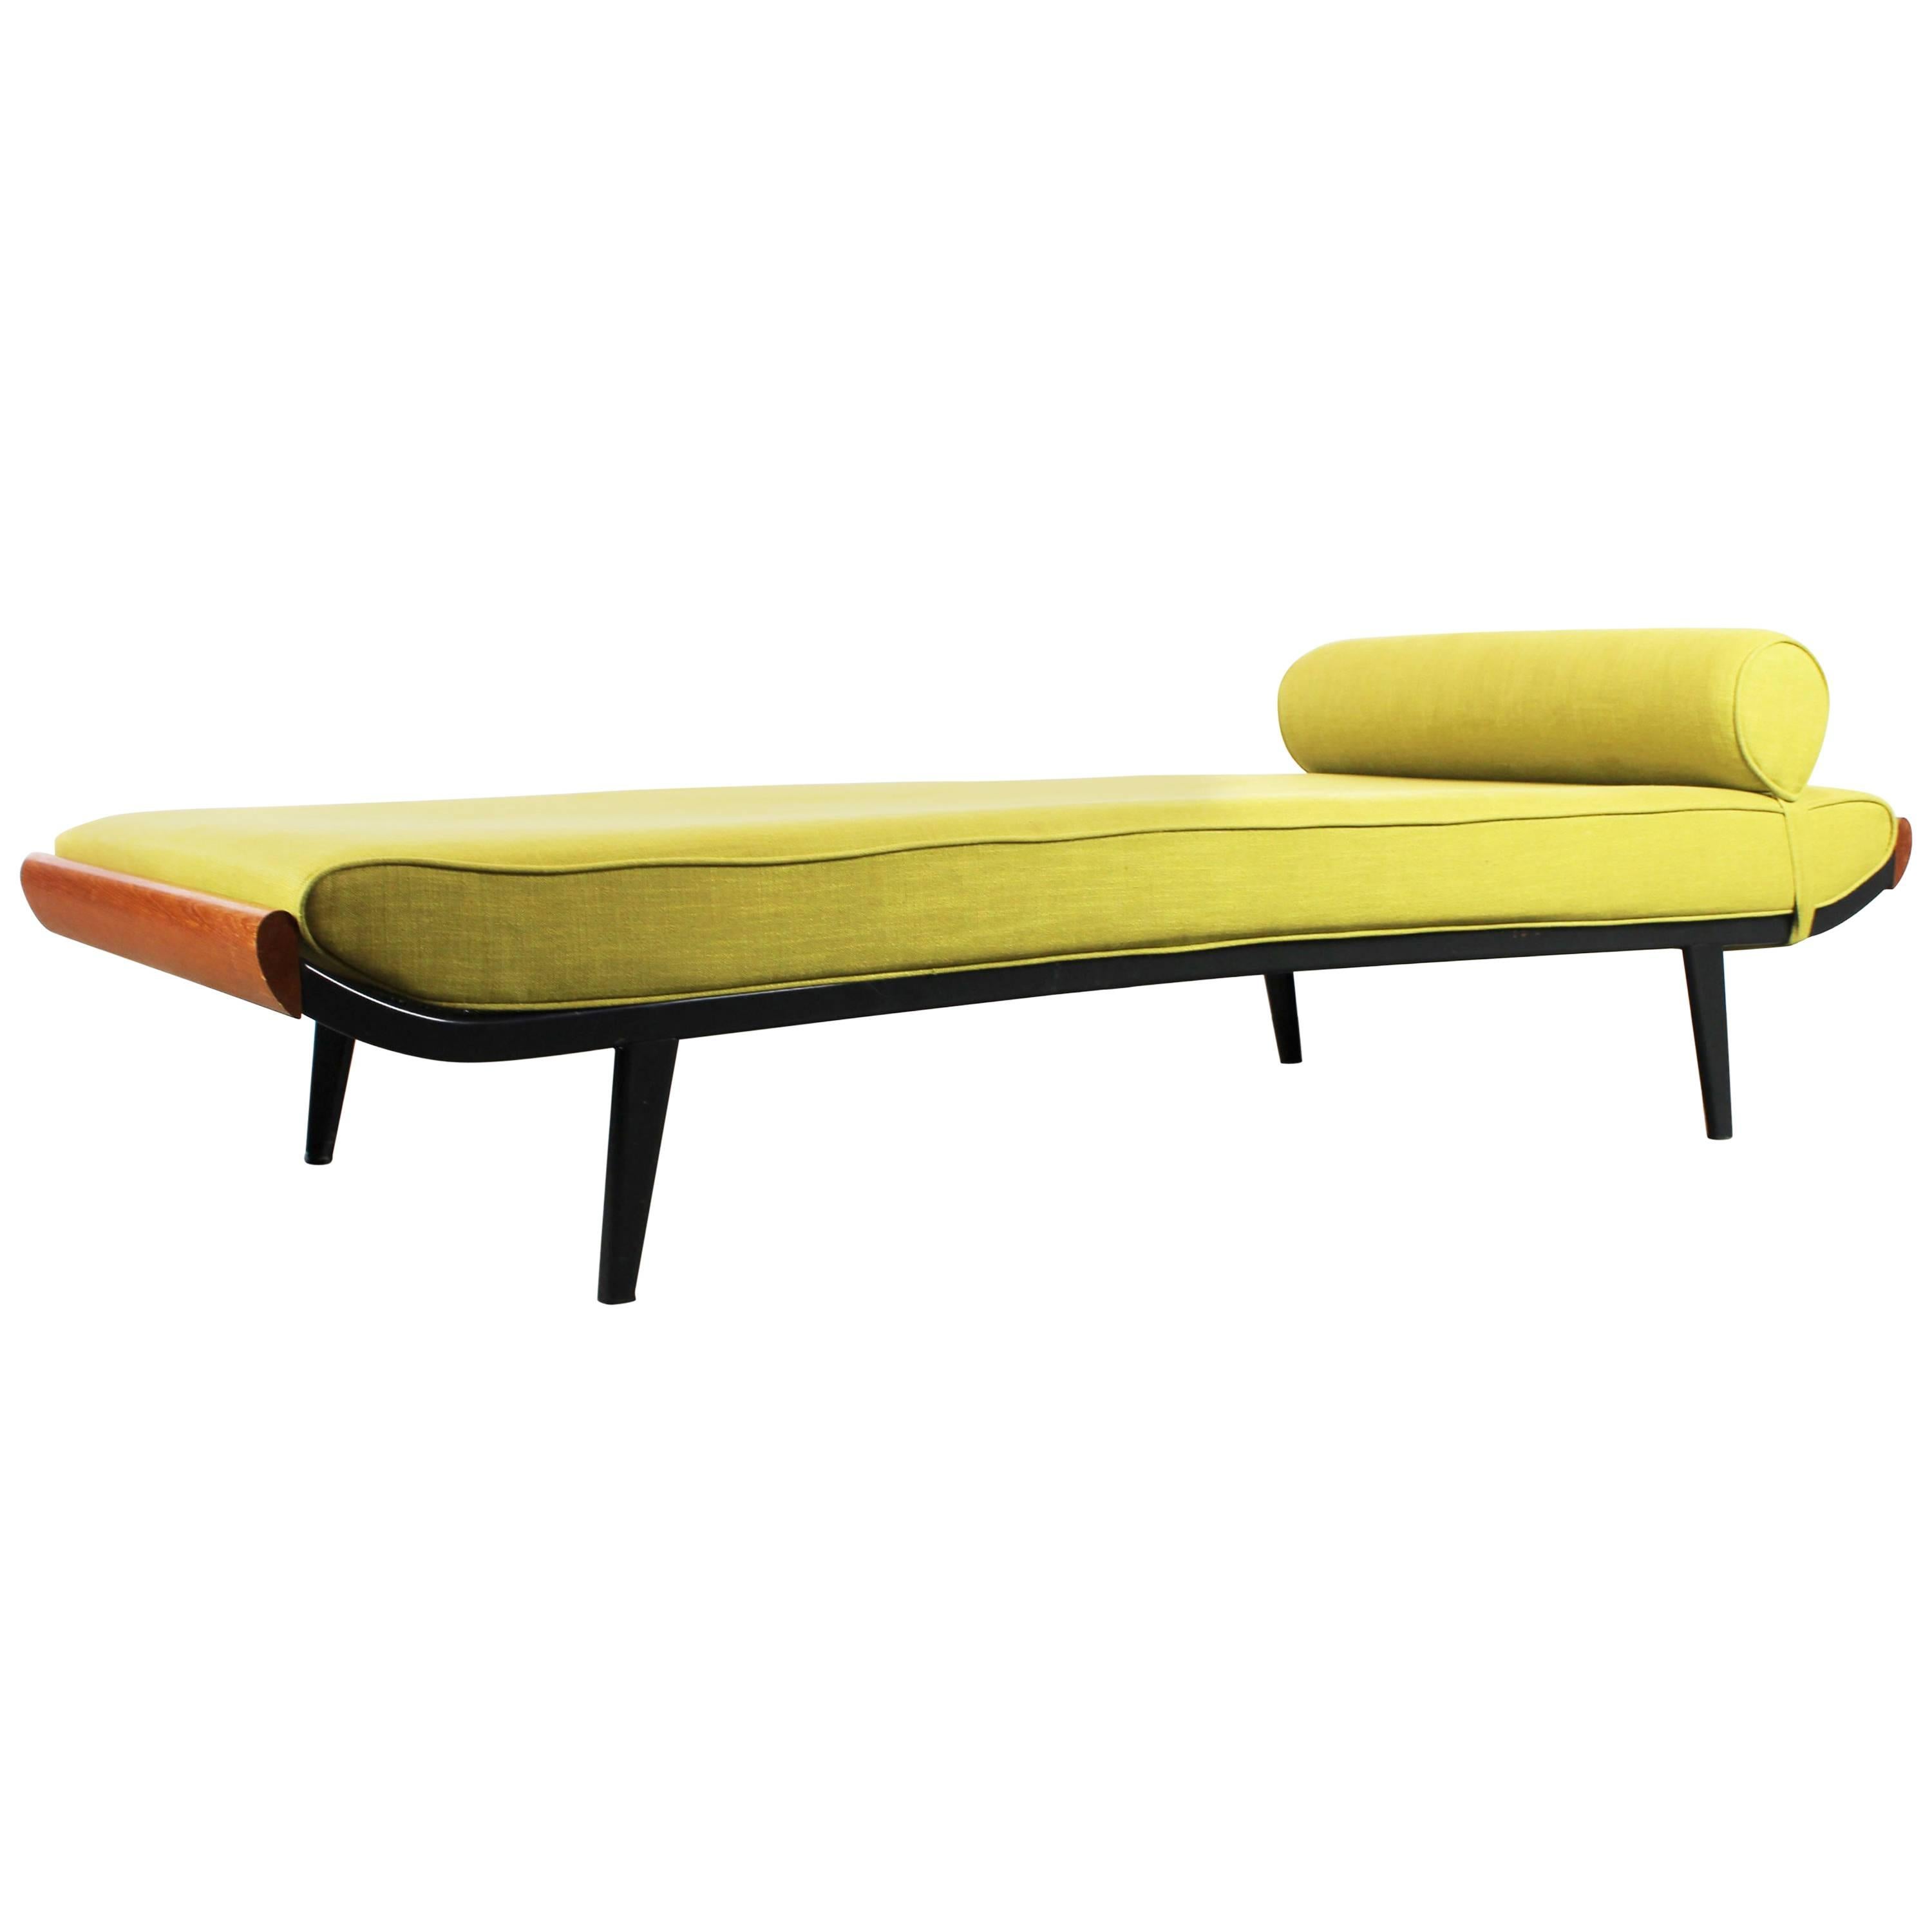 Cleopatra Daybed by Dick Cordemeijer for Auping, 1953, Dutch Design Black Green